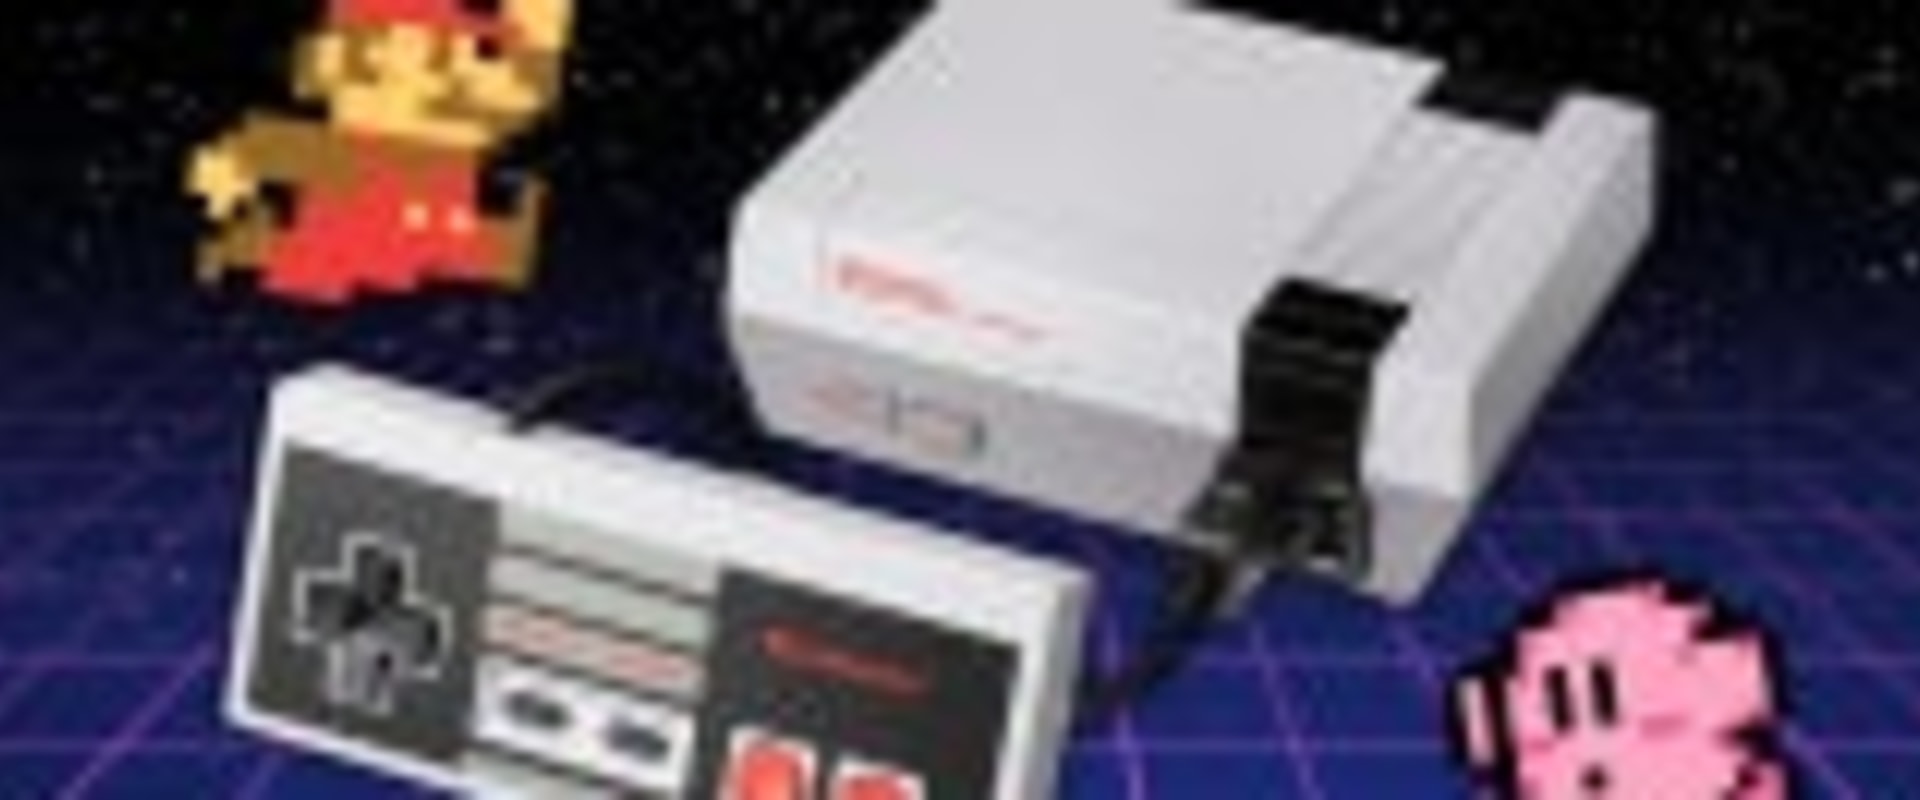 A Look at the NES: A Classic Video Game System